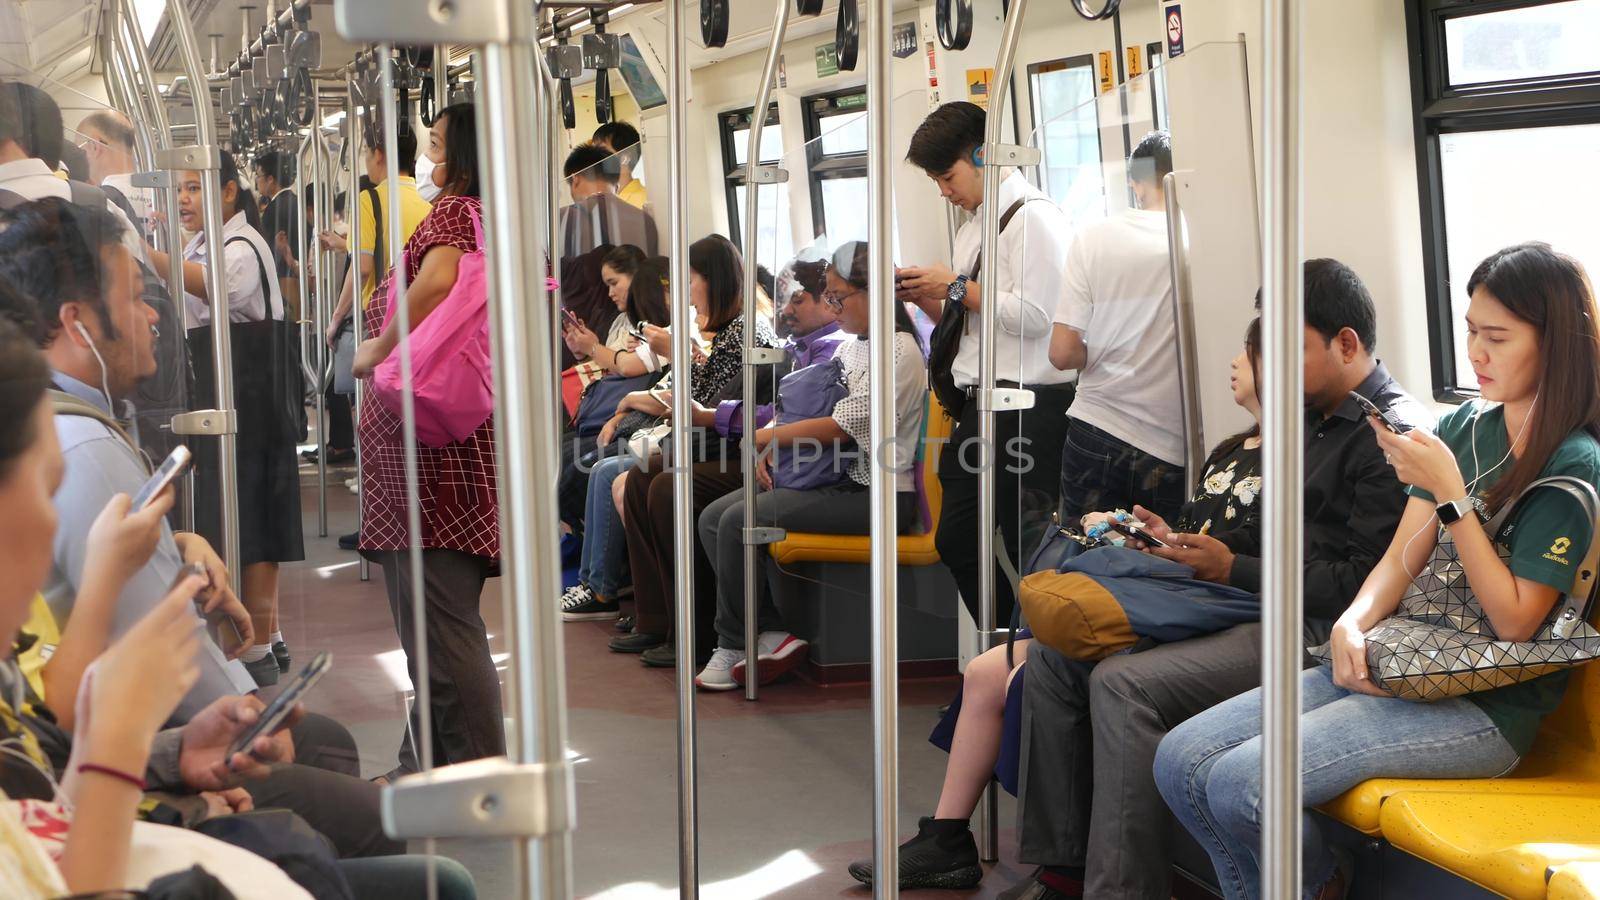 BANGKOK, THAILAND - 10 JULY, 2019: Asian passengers in train using smartphones. Thai people online surfing internet in bts car. Public transportation. Addiction from social media and phone in subway. by DogoraSun